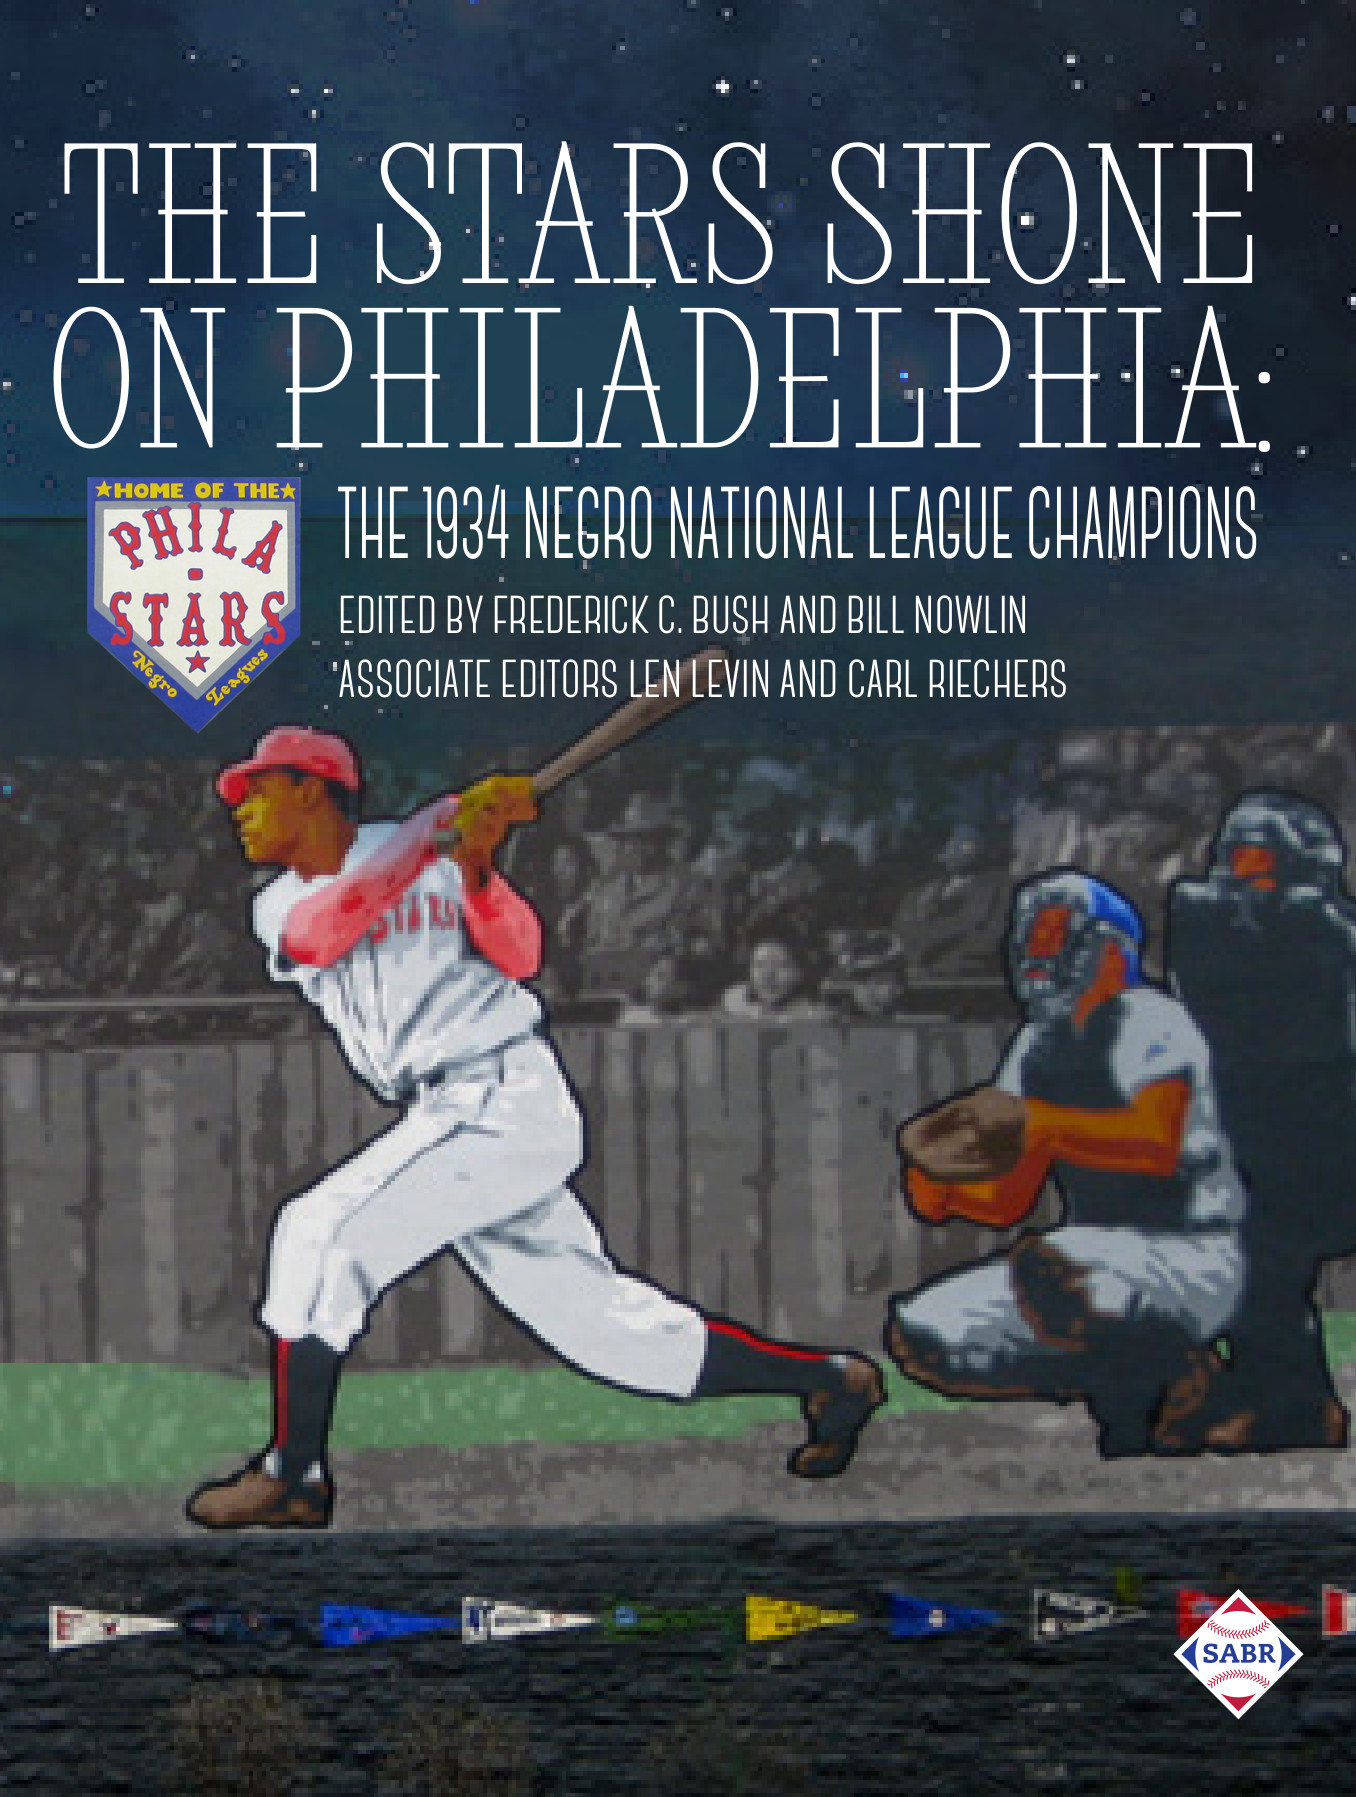 The Stars Shone on Philadelphia: The 1934 Negro National League Champions, edited by Frederick C. Bush and Bill Nowlin